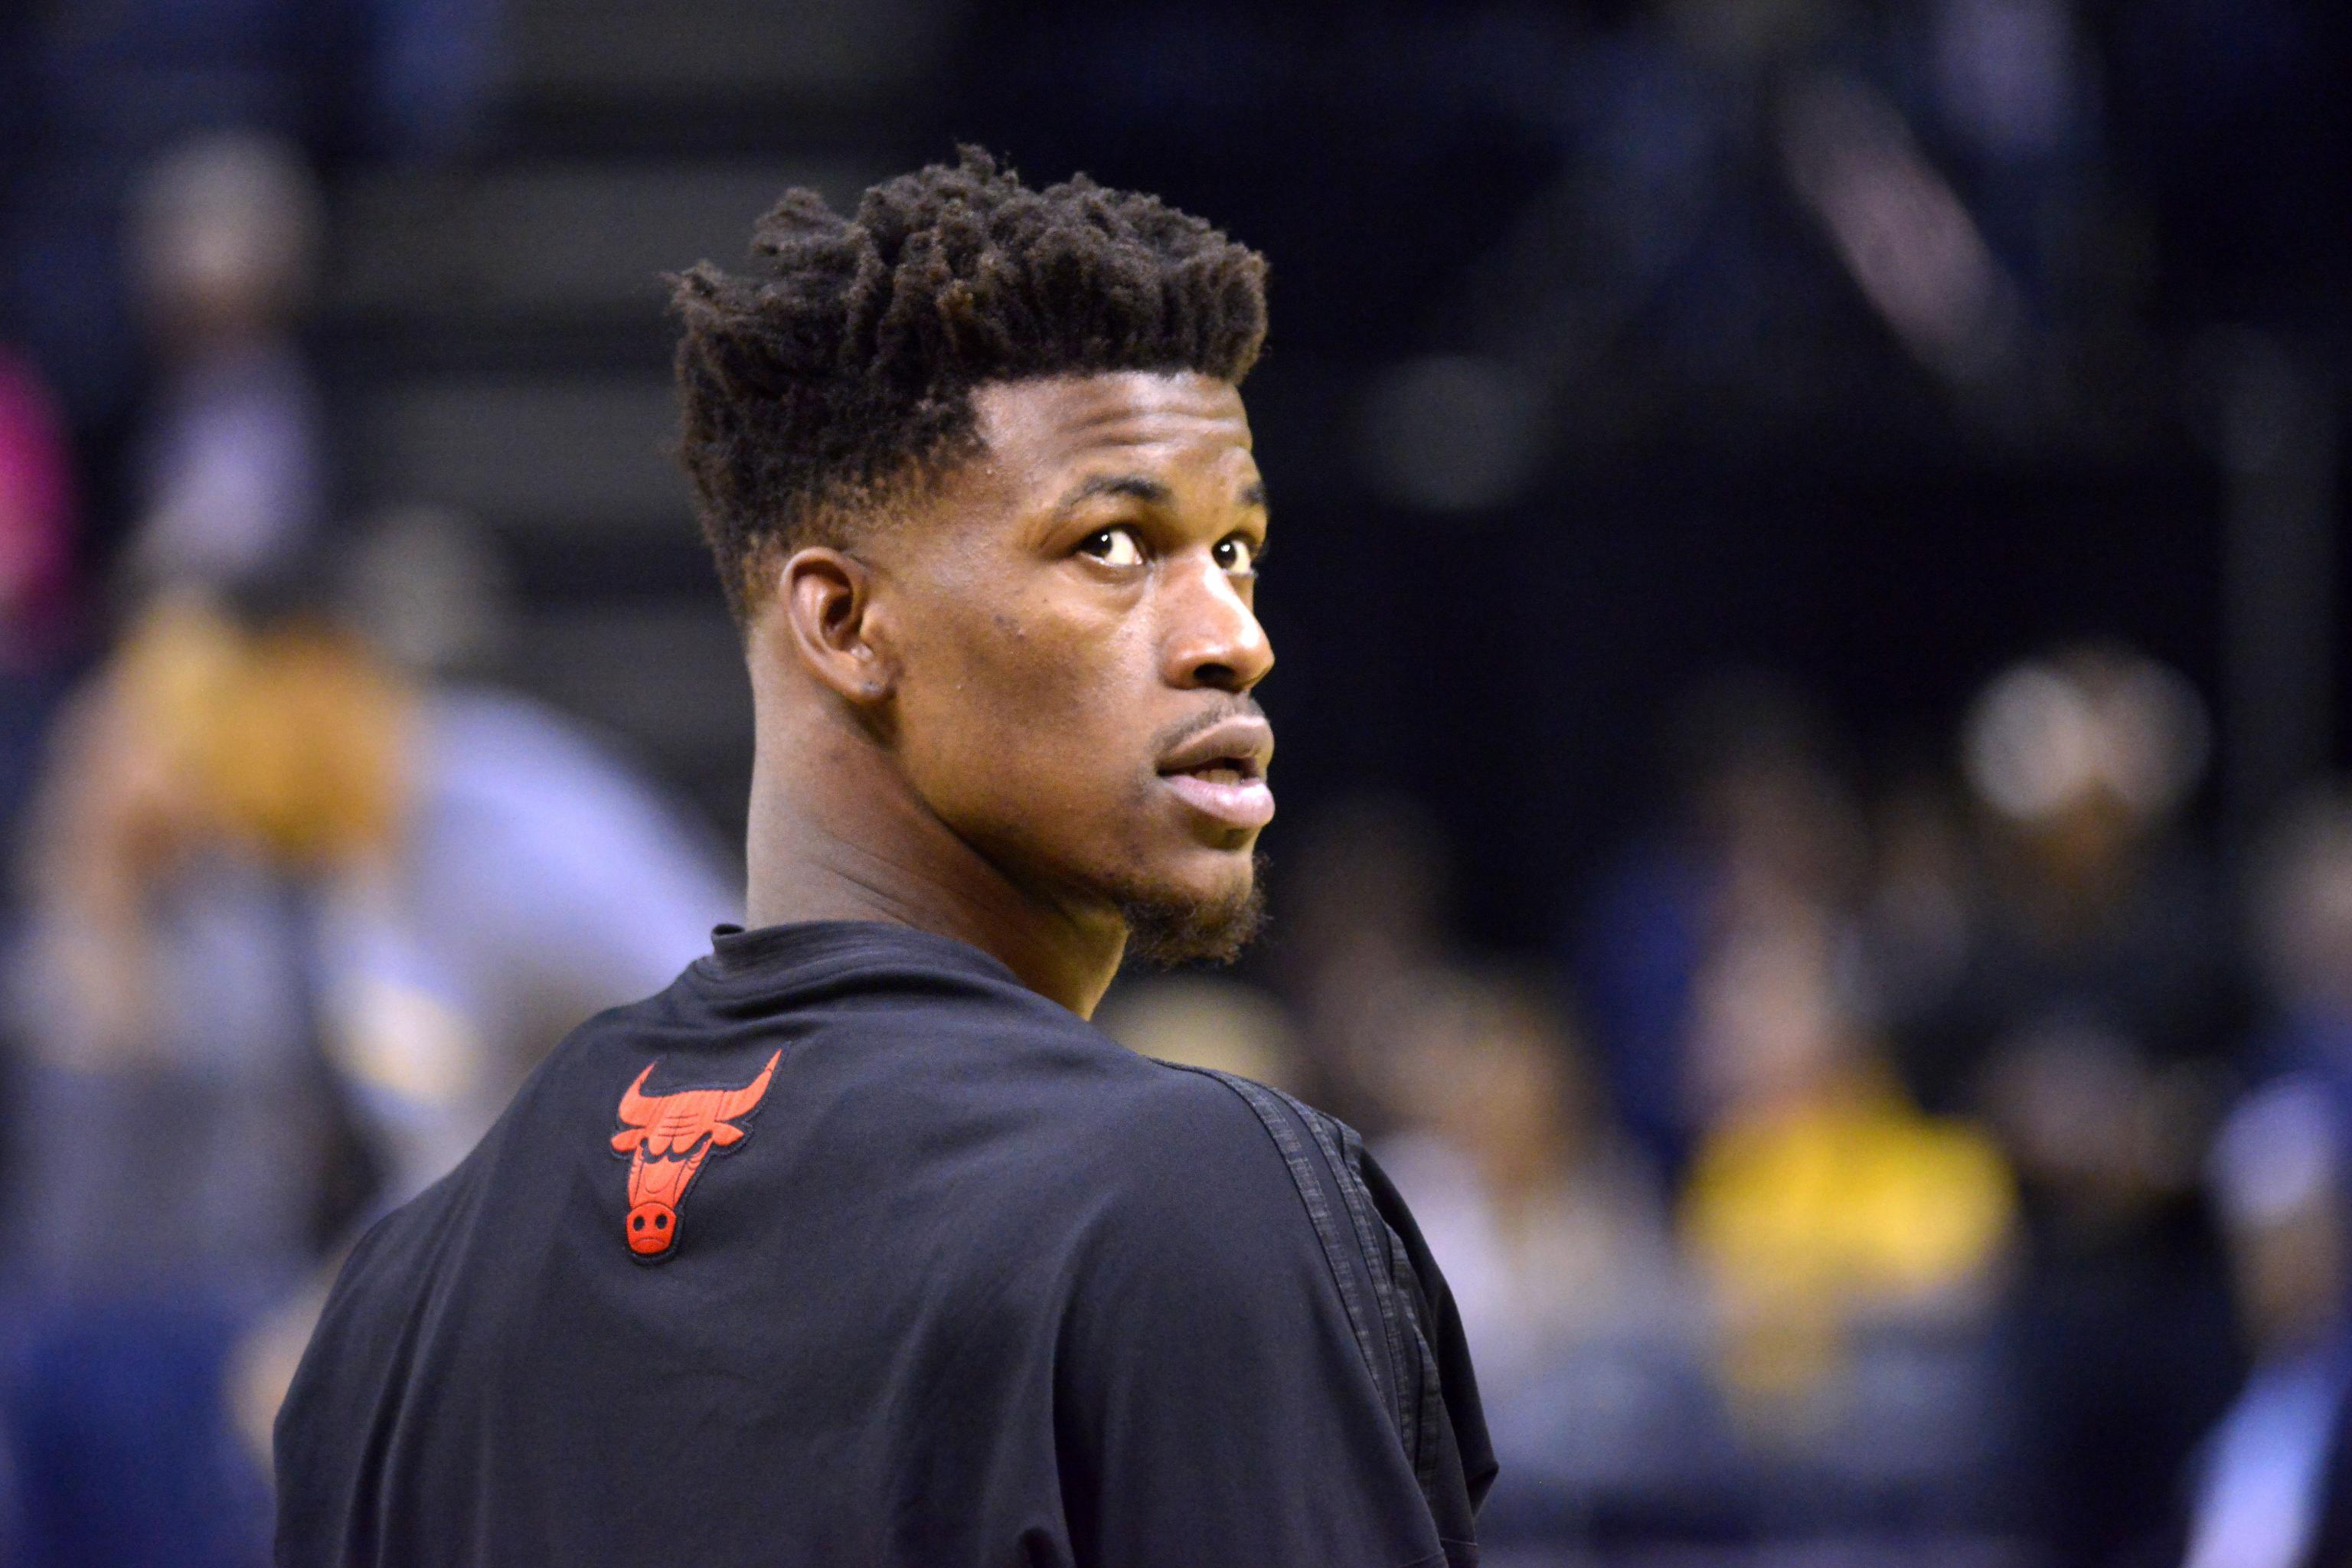 Report: Bulls teammates say Jimmy Butler receives 'preferential